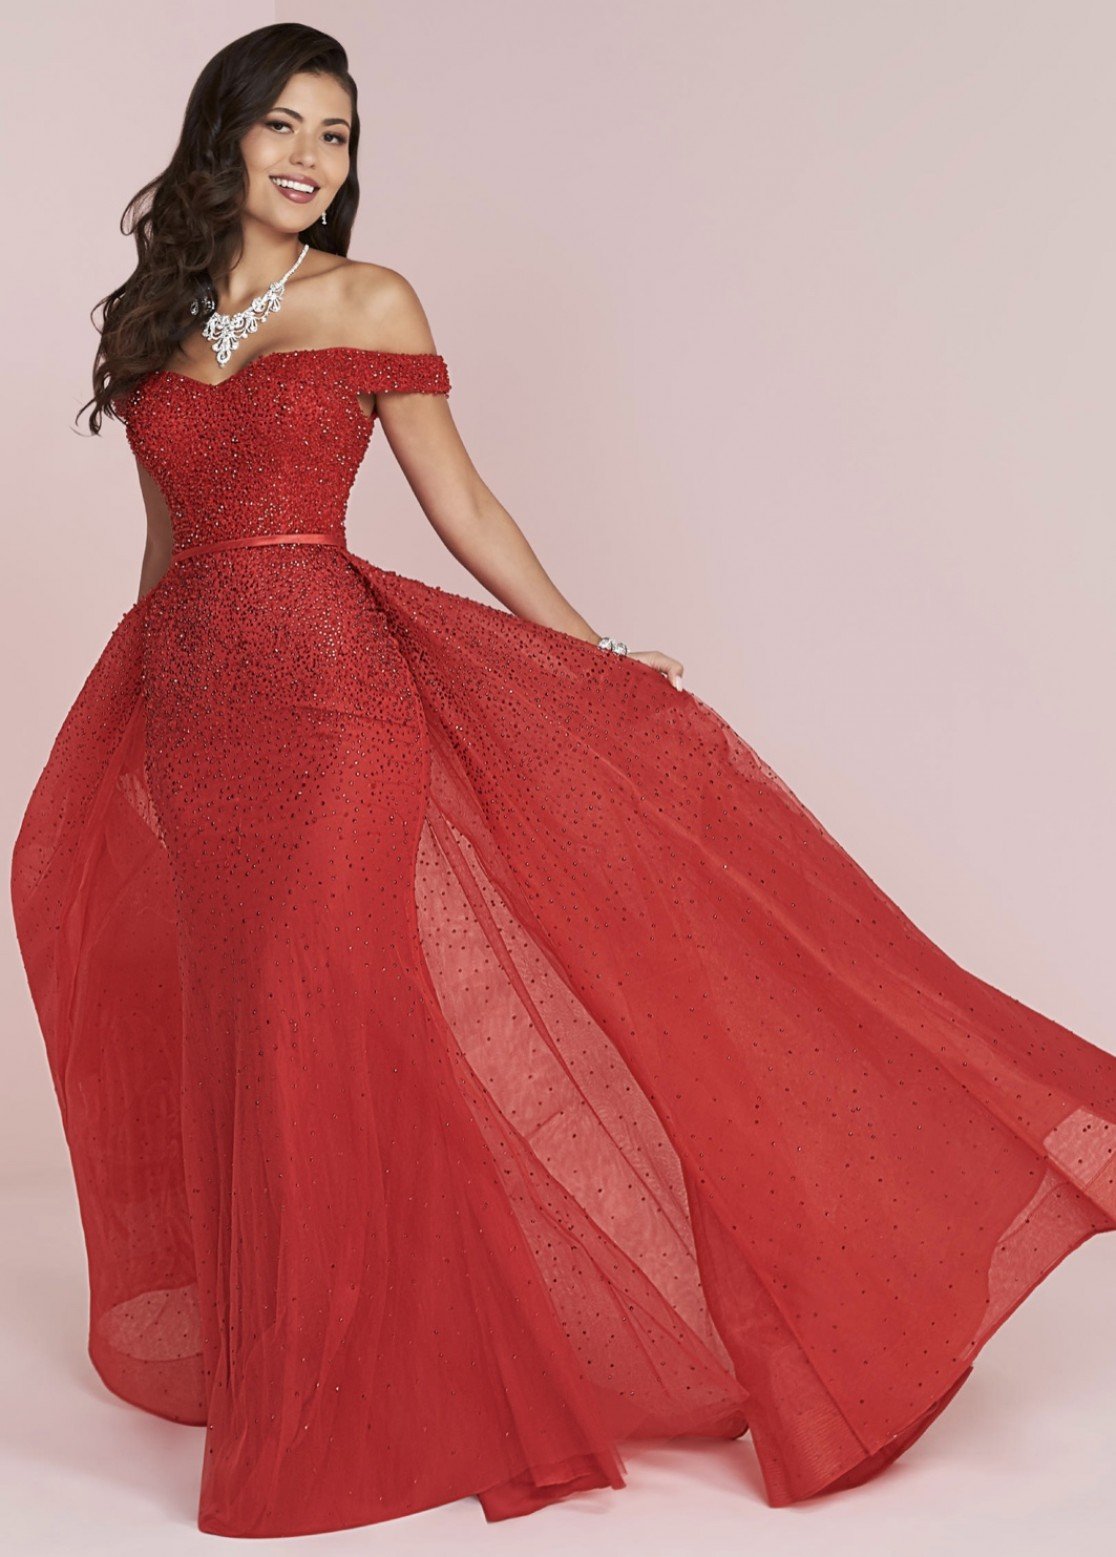 Red Fully Beaded gown